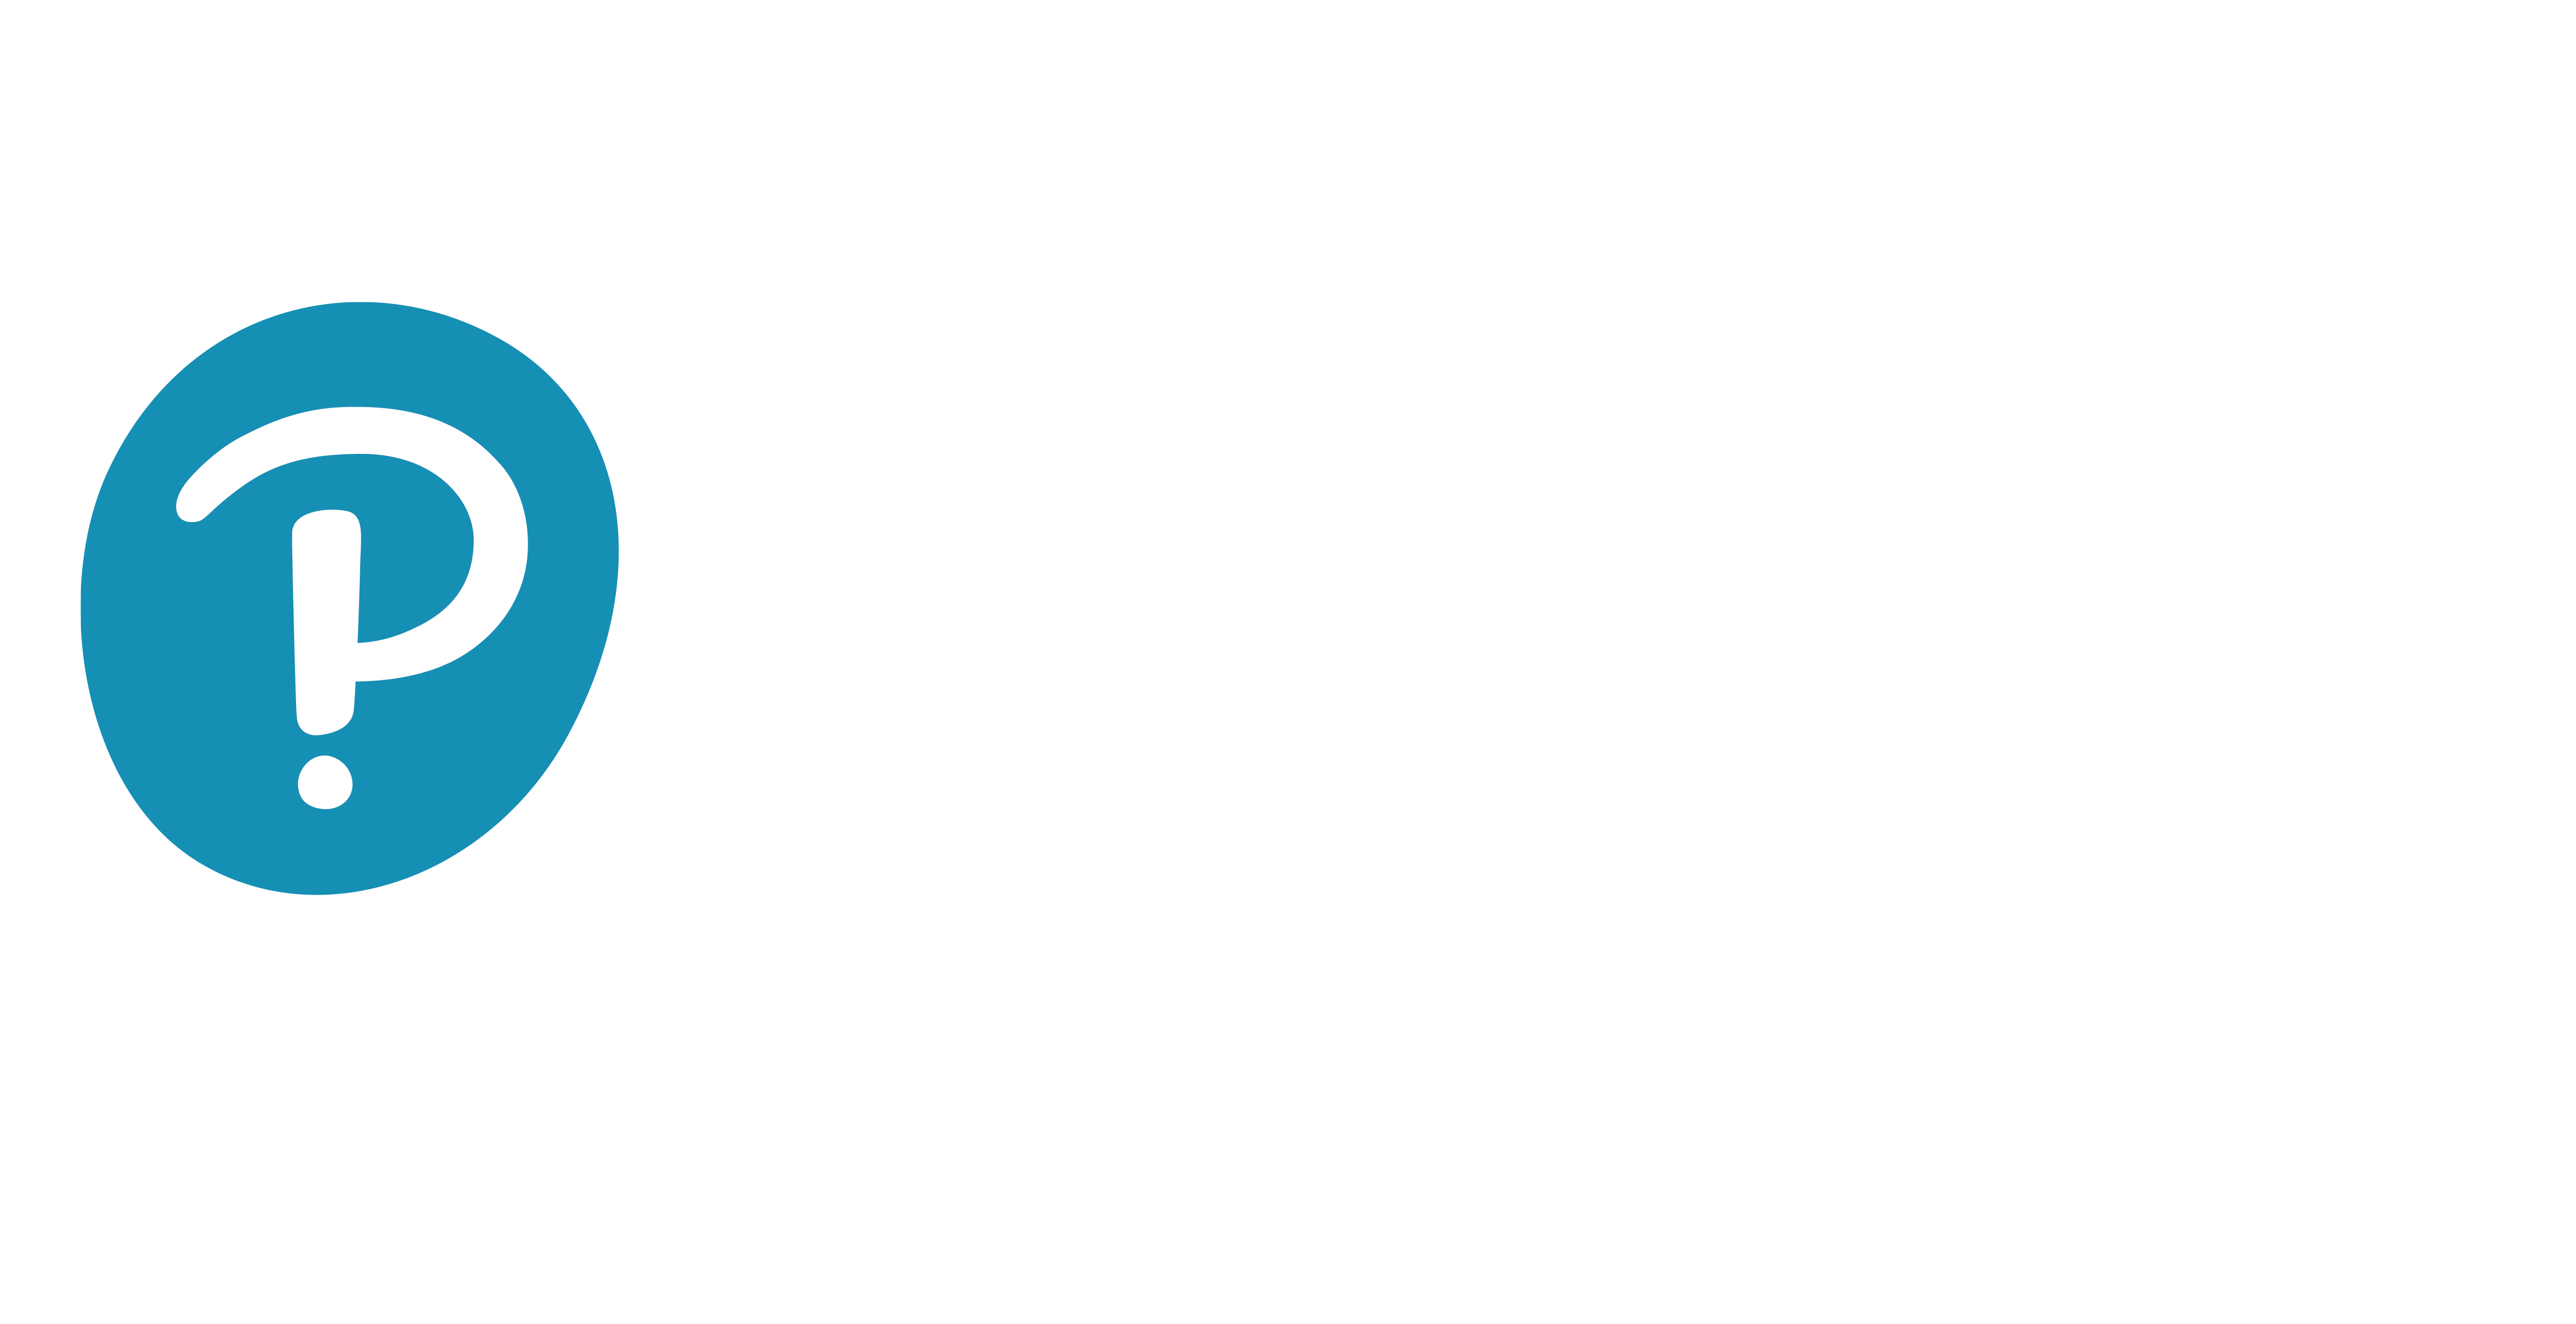 Services arm of Pearson Clinical and Talent Assessment (PCTA), India.